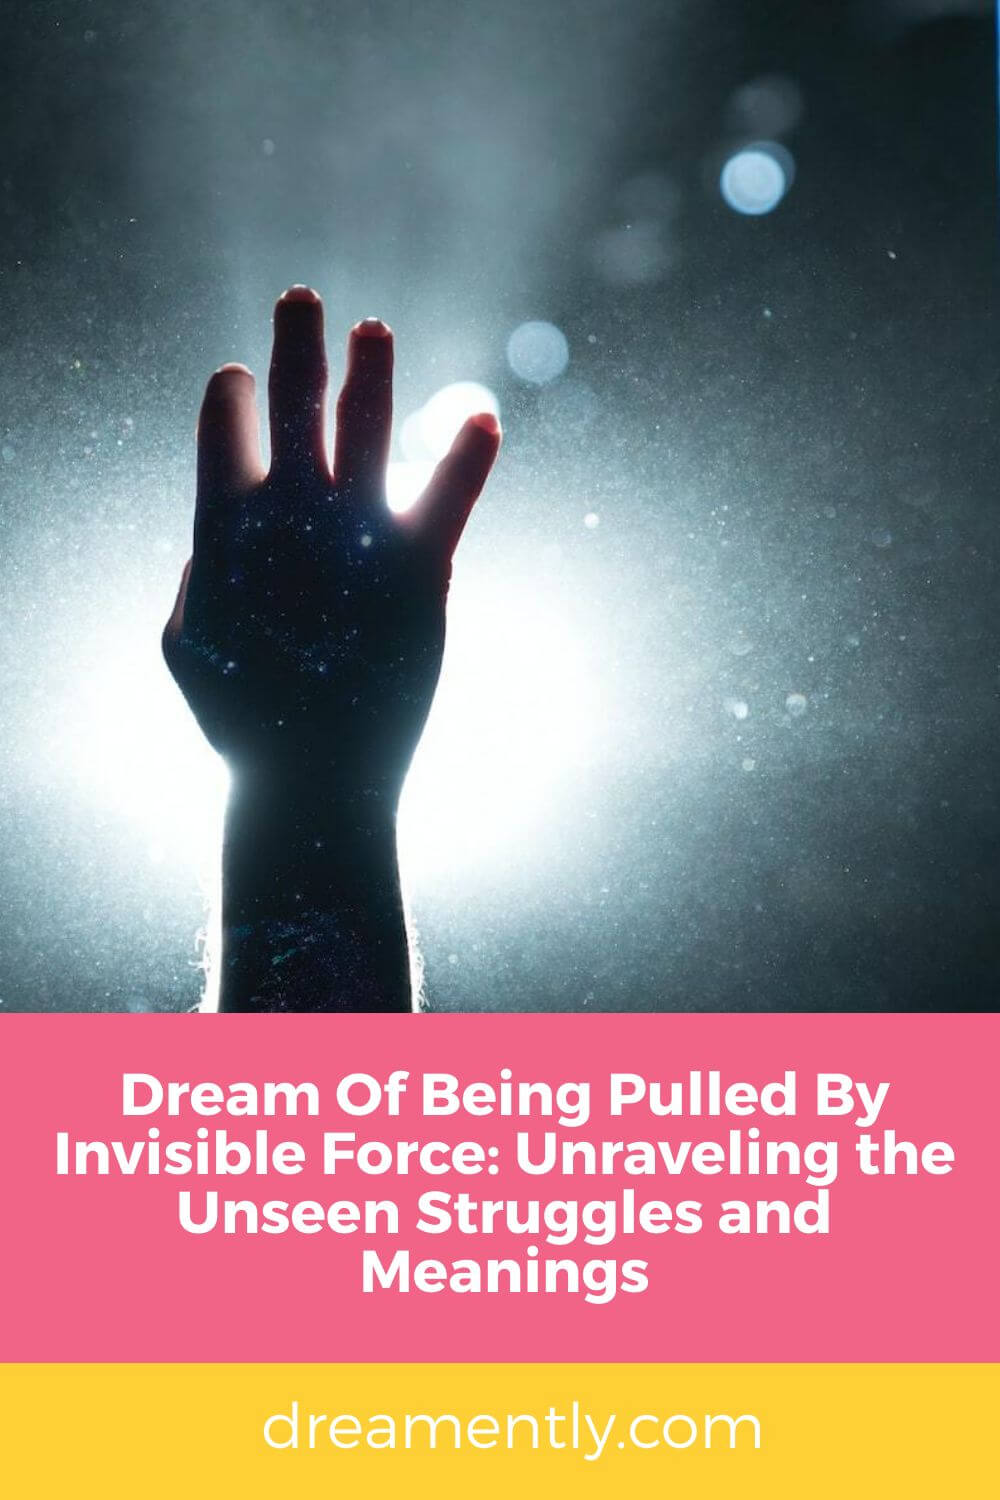 Dream Of Being Pulled By Invisible Force- Unraveling the Unseen Struggles and Meanings (2)